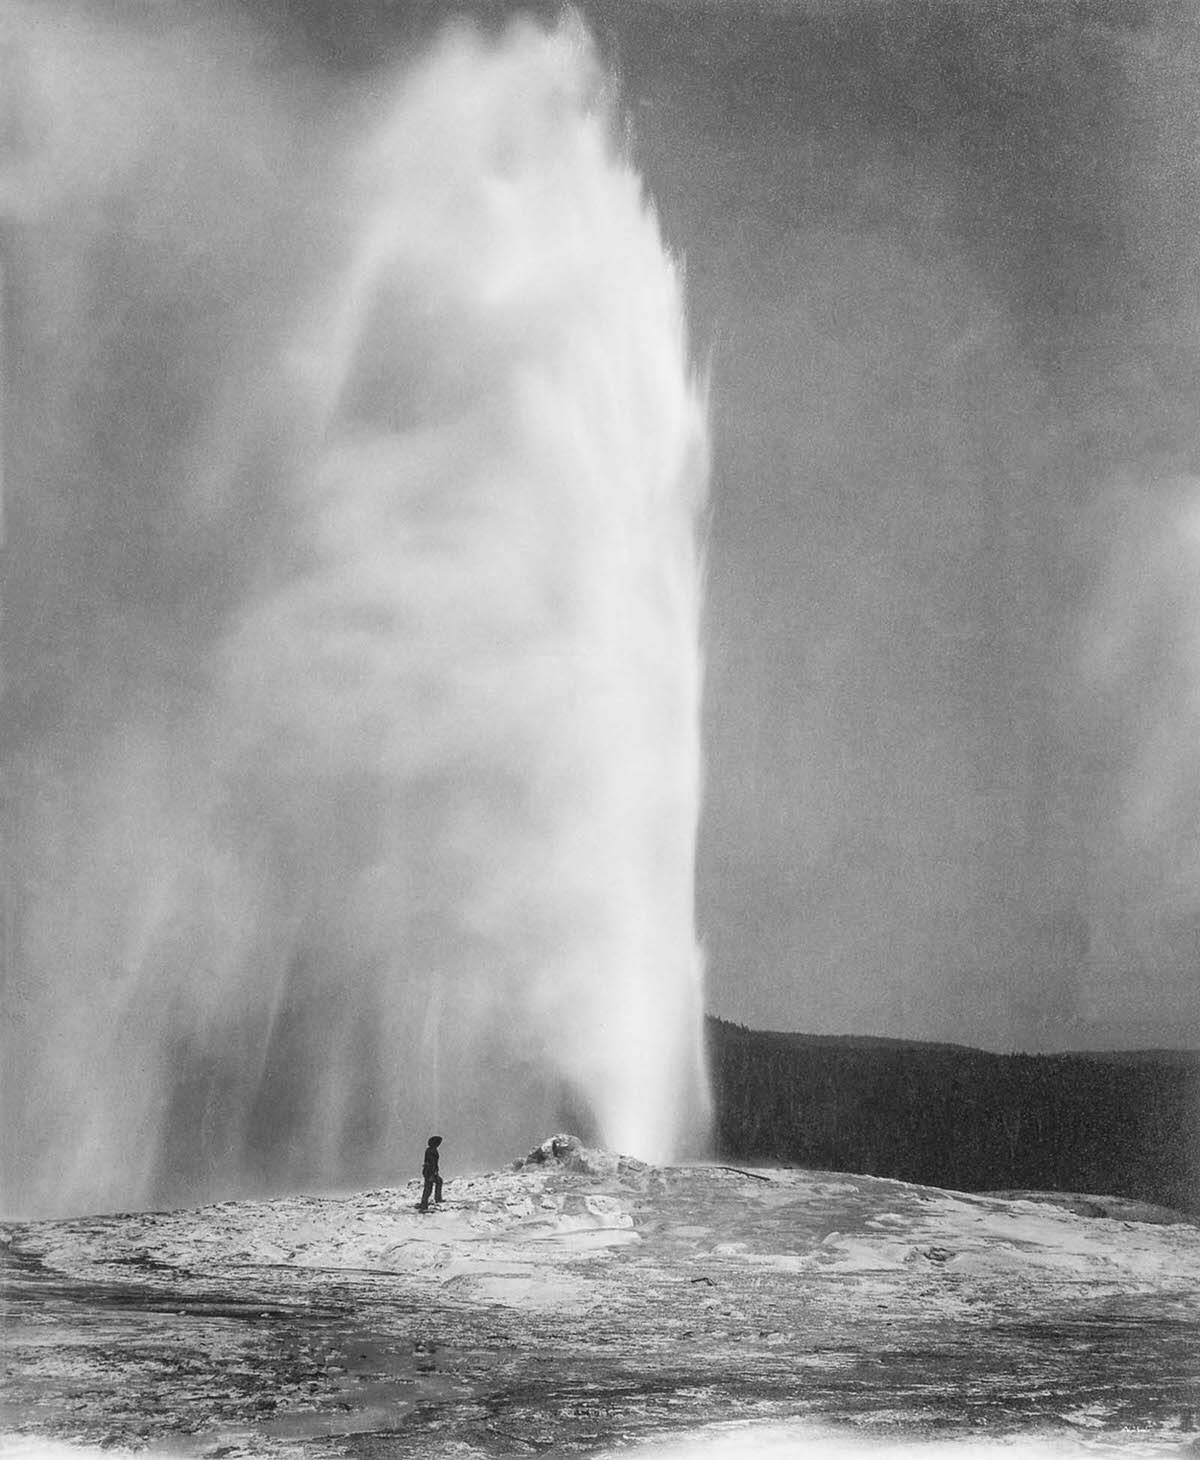 A member of a government geological survey stands next to Old Faithful in Yellowstone, two years before its designation as a National Park, 1870.